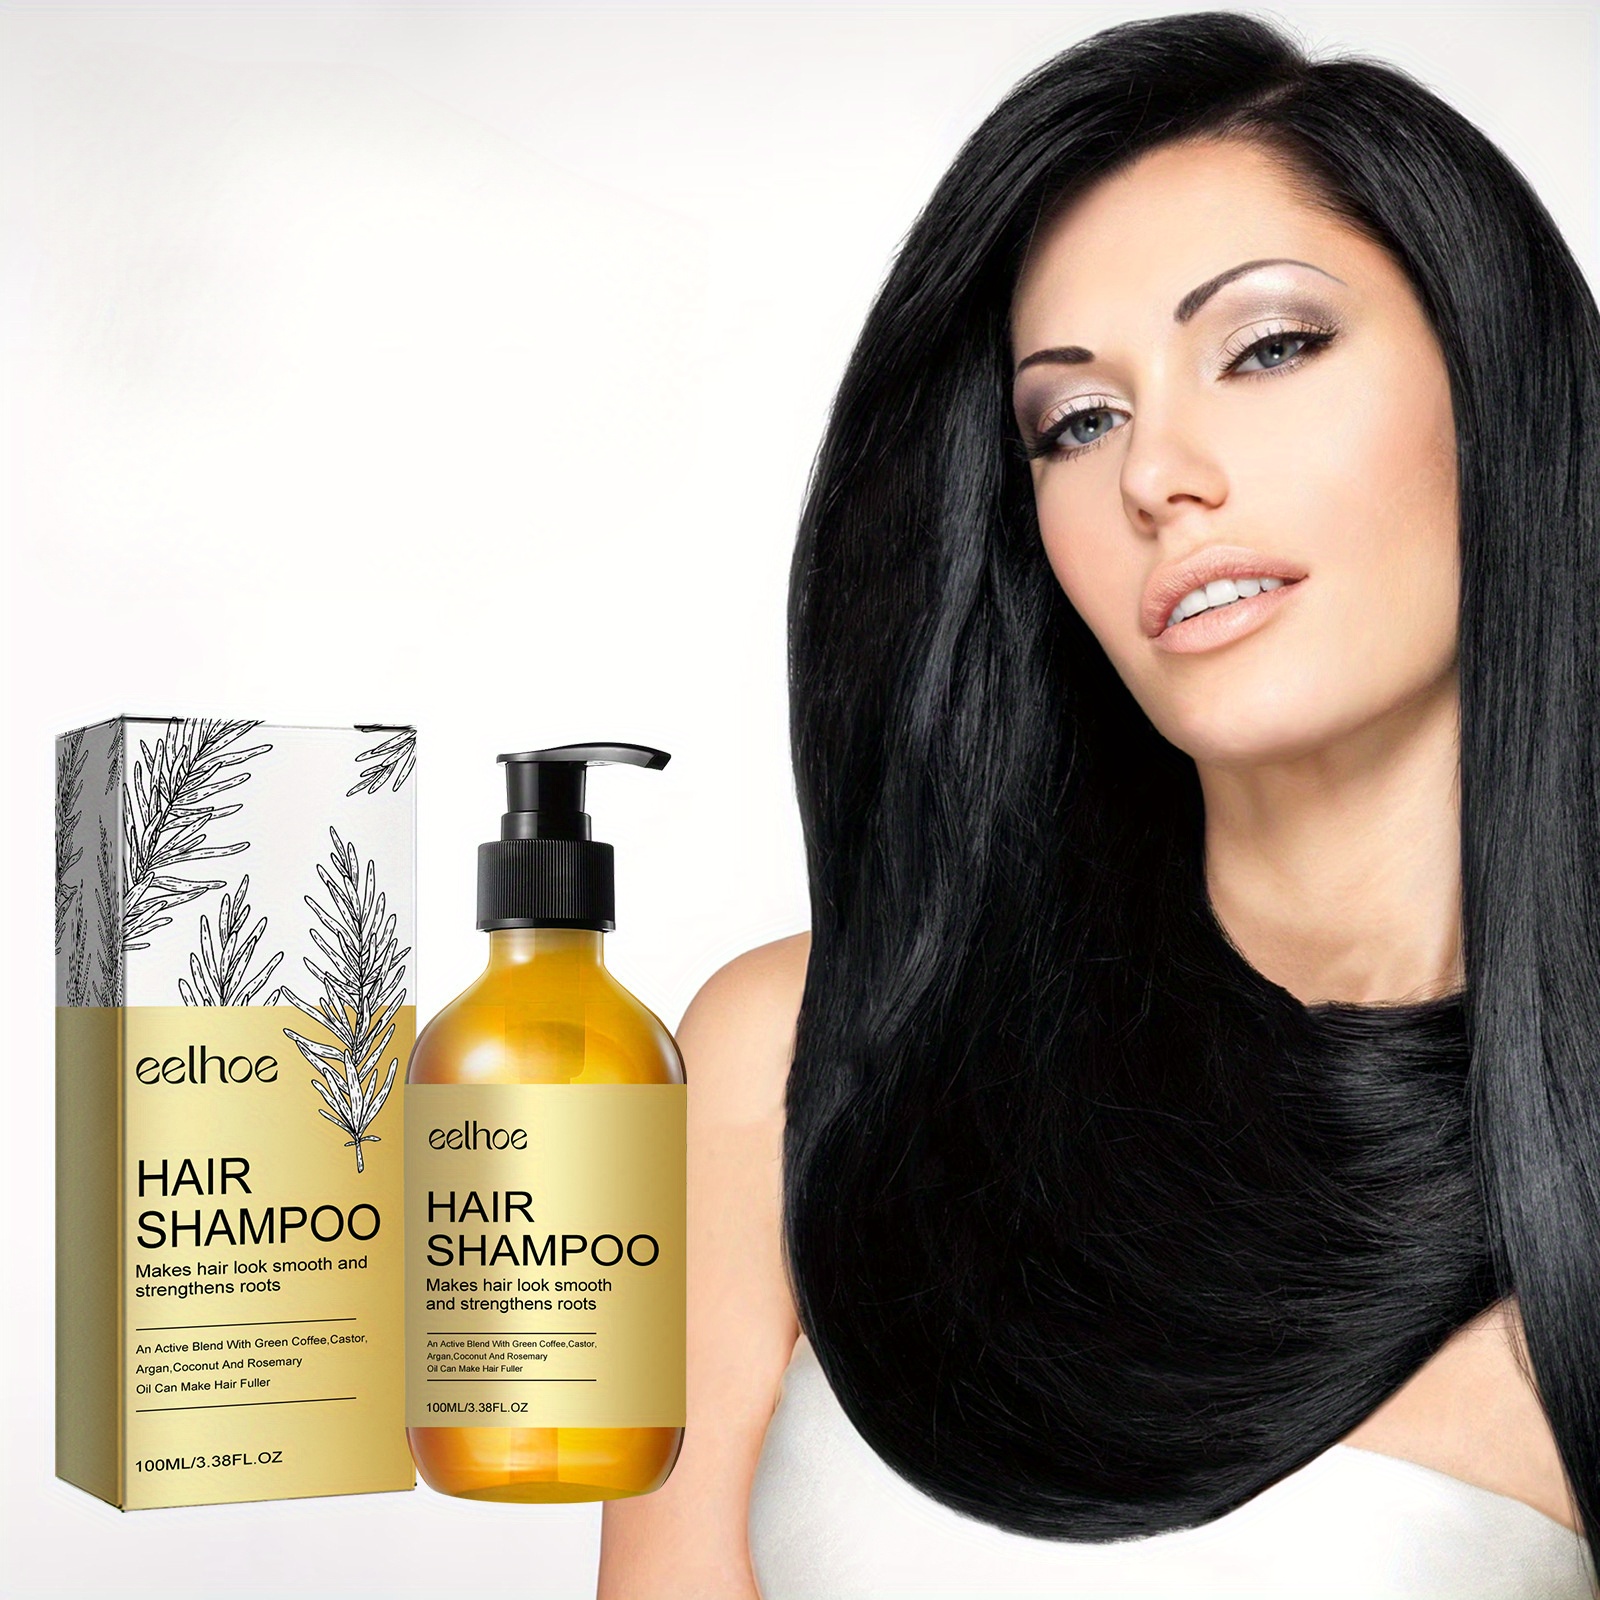 

Rosemary Hair Shampoo, Contains Argan Oil And Coconut Oil, Refreshing And Smoothing Hair, Hair Care Shampoo